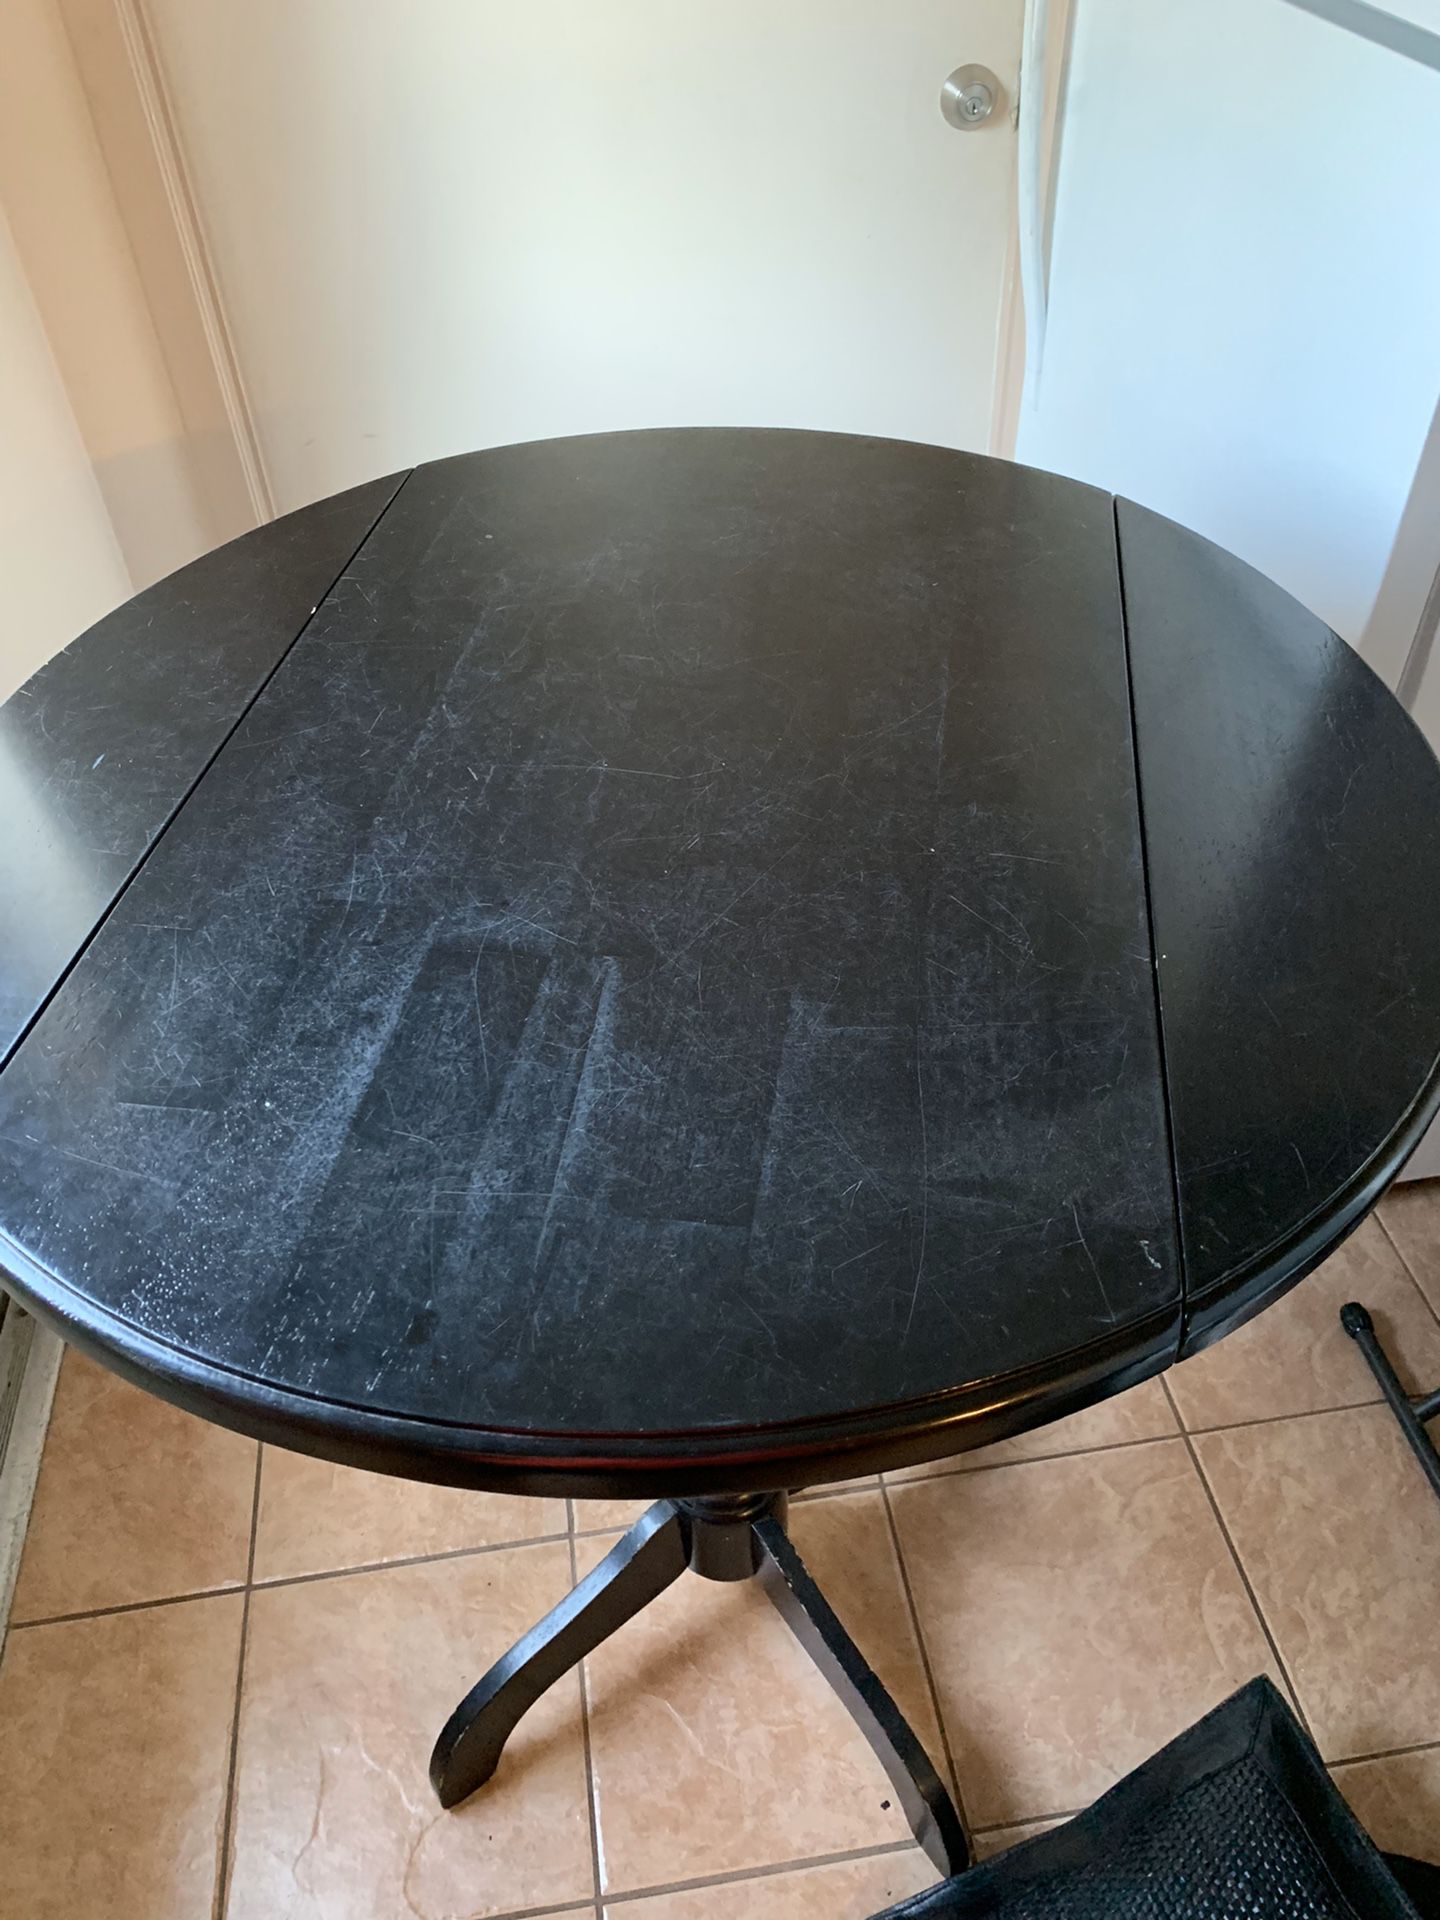 Countertop table for 2 with 2 chairs